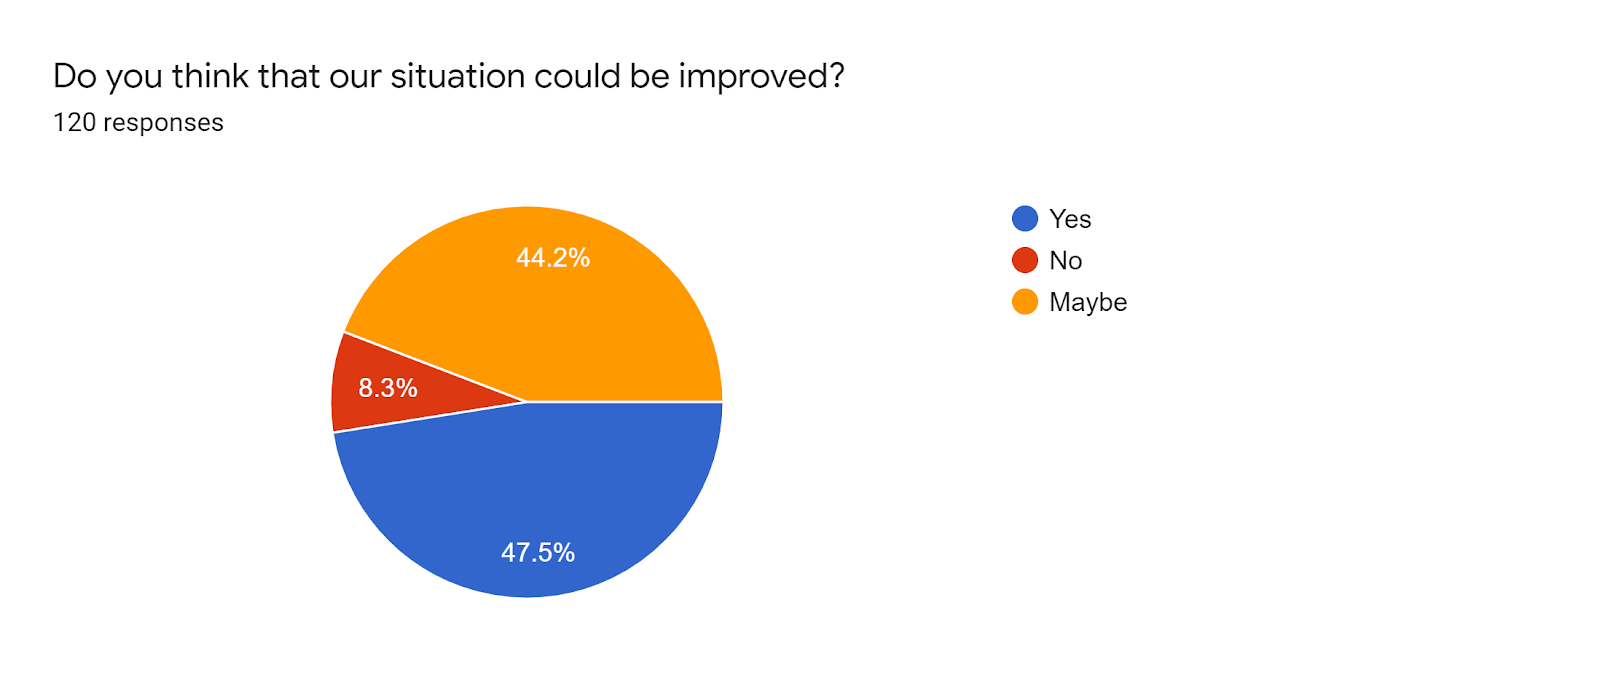 Forms response chart. Question title: Do you think that our situation could be improved?. Number of responses: 120 responses.